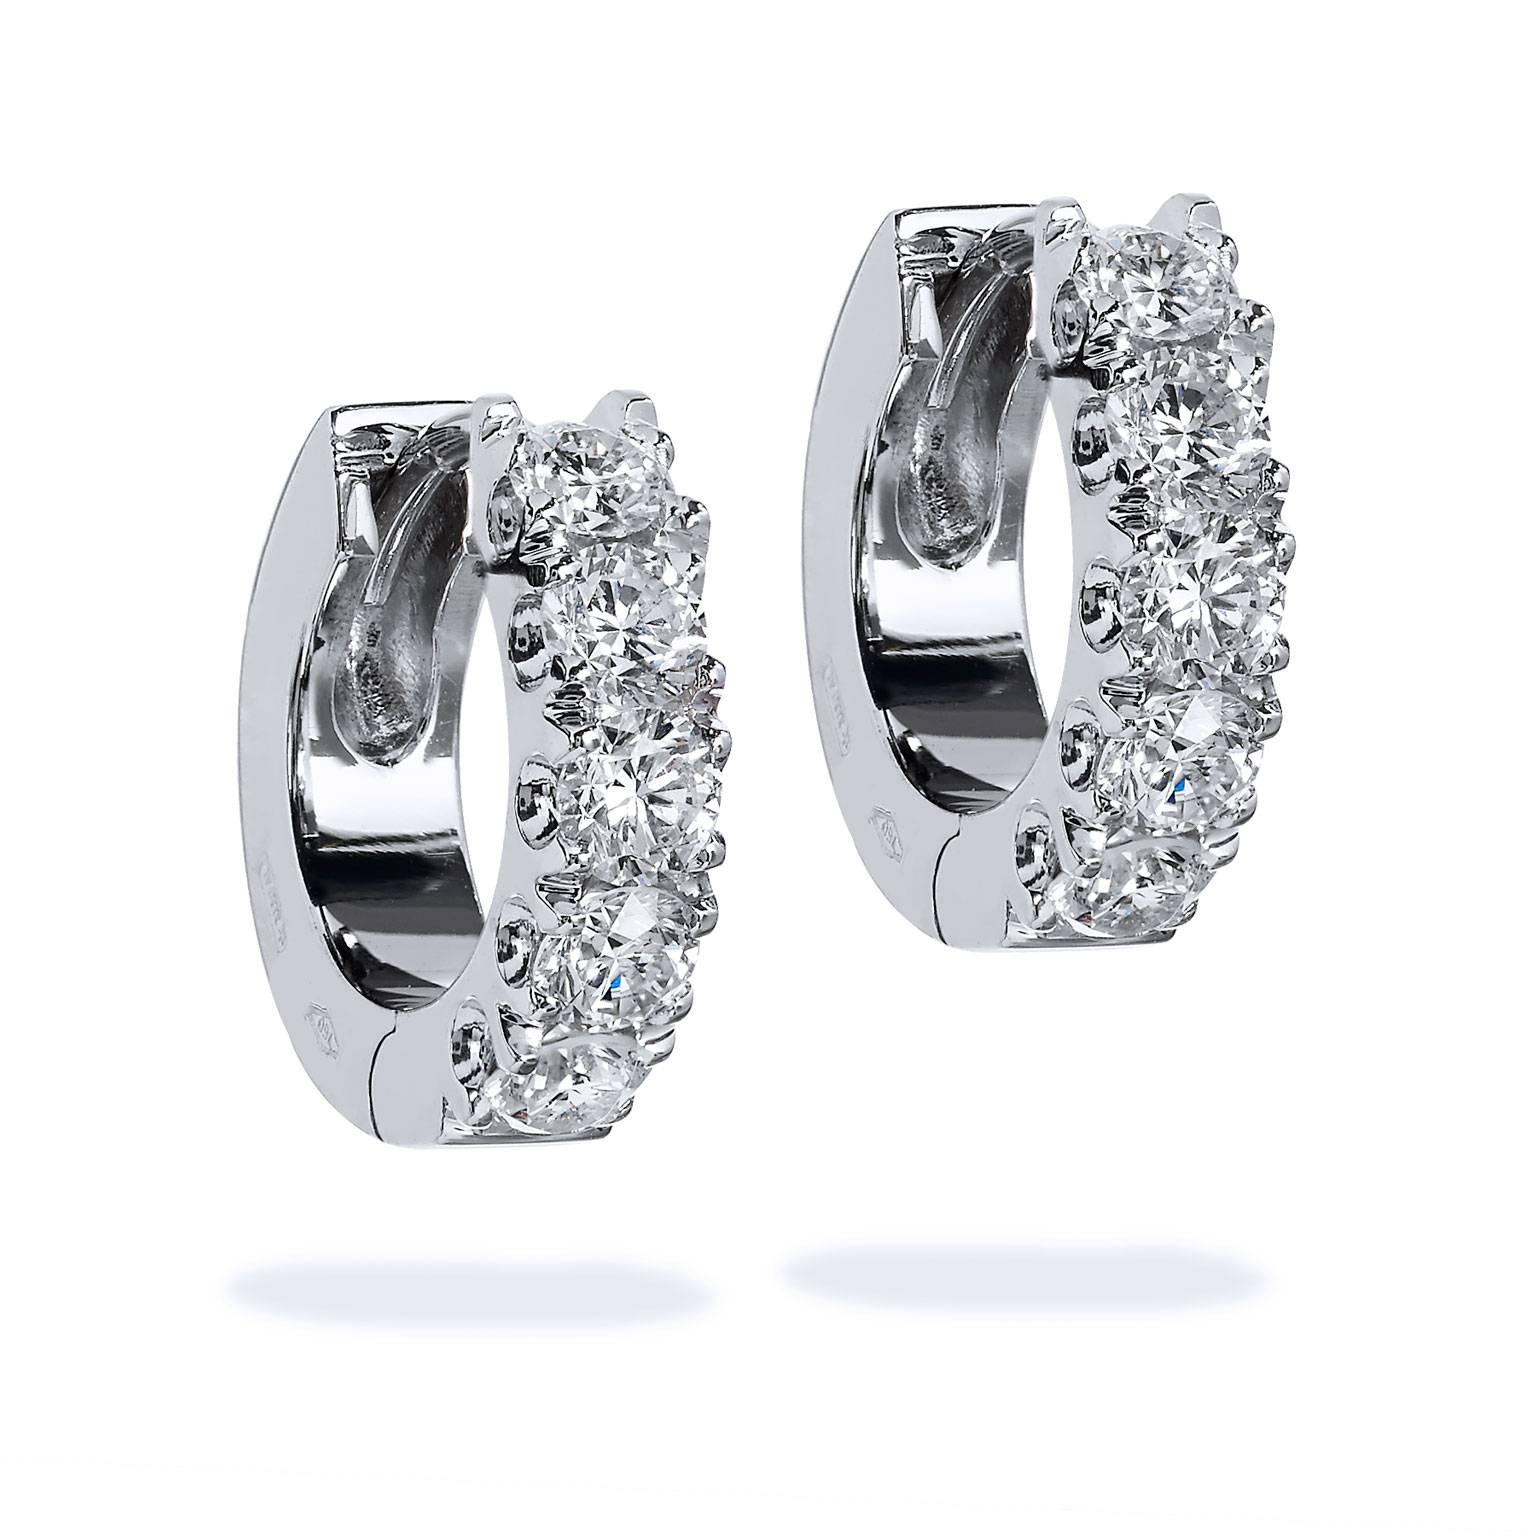 18 karat white gold hoop earrings featuring 1.48 carat of diamond color: G and clarity: SI.